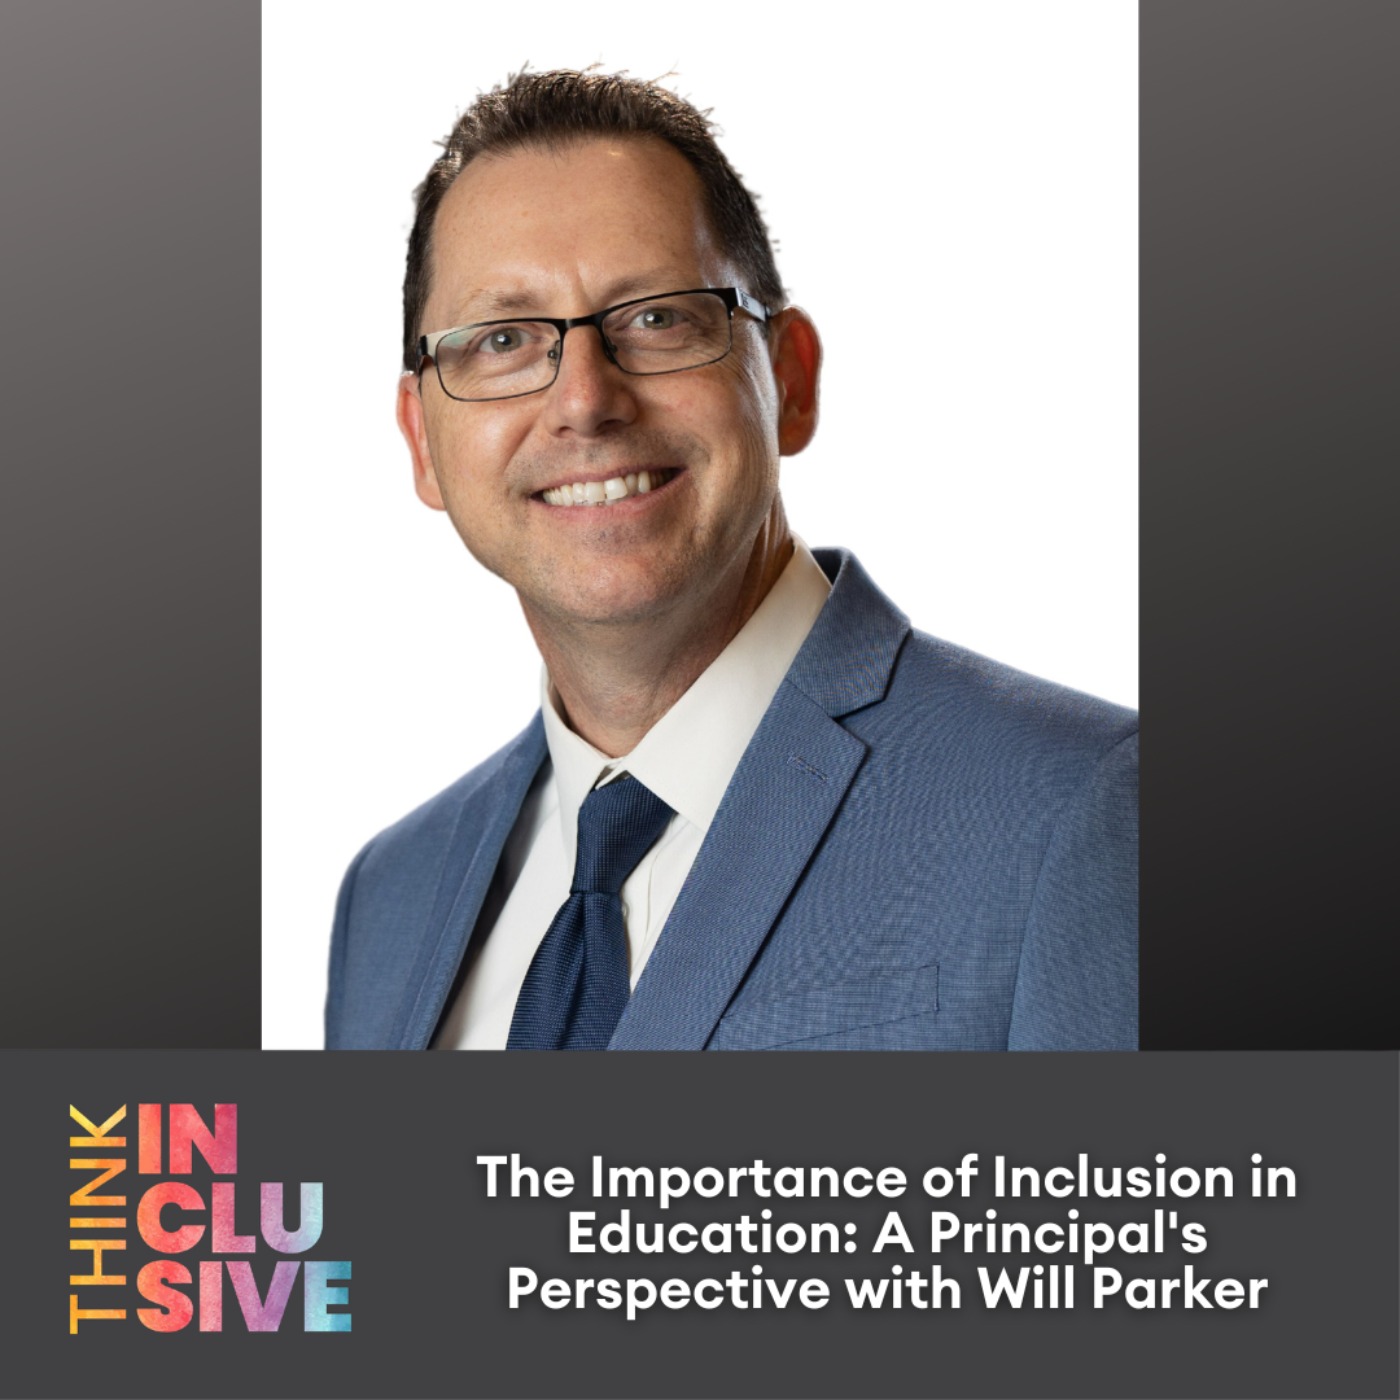 The Importance of Inclusion in Education: A Principal’s Perspective with Will Parker